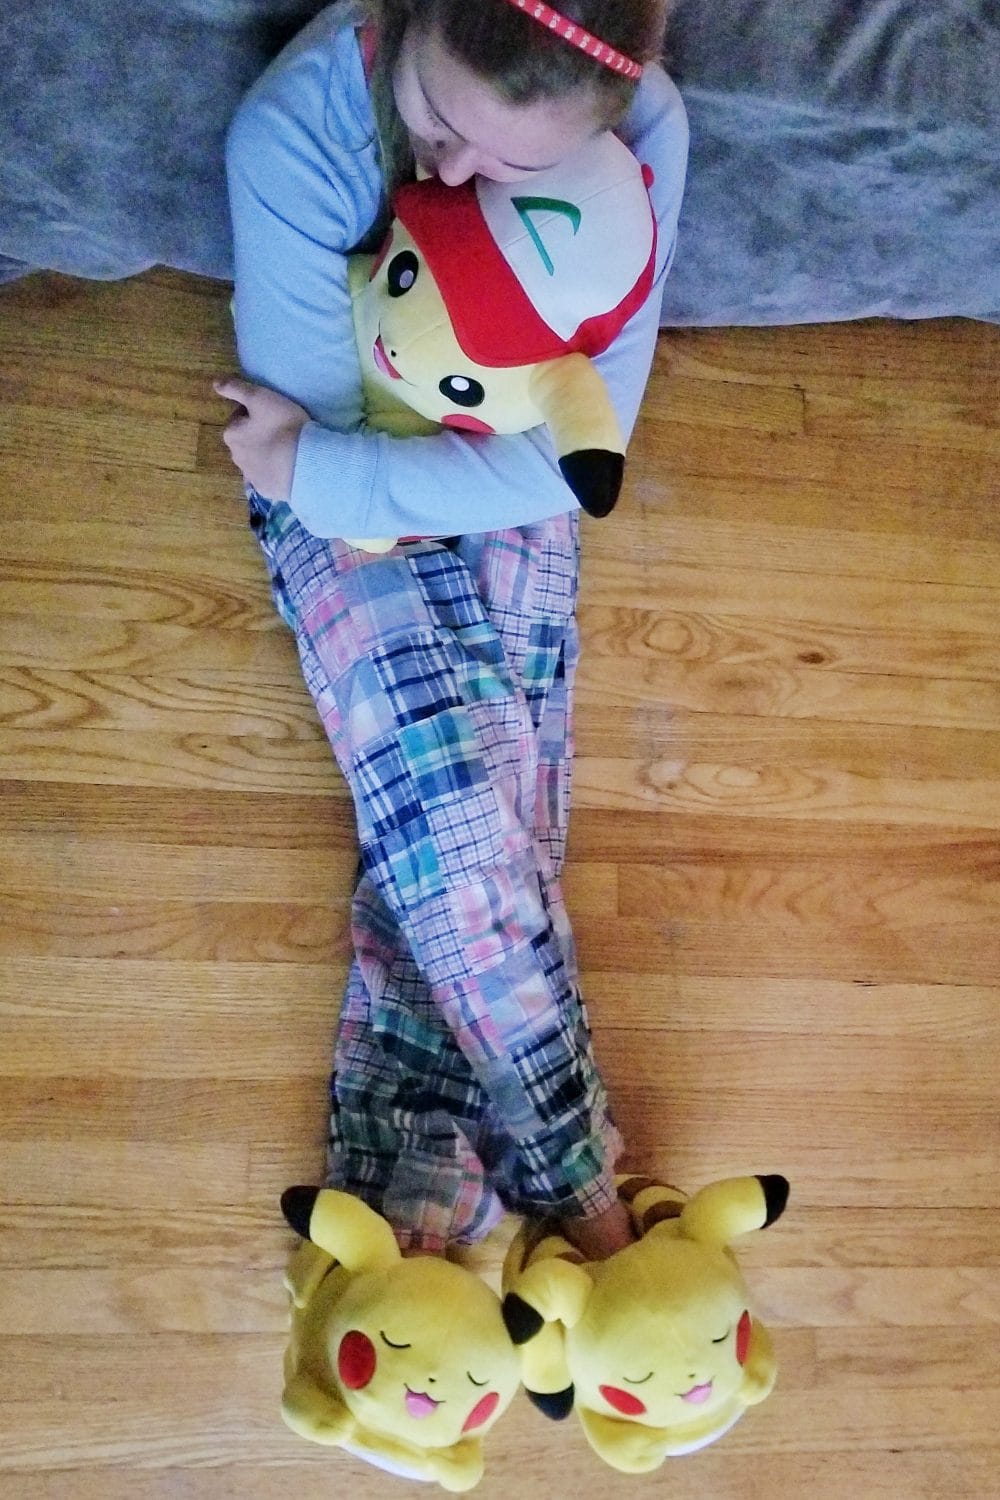 Chesney hugging a plush Pikachu while wearing Pokemon slippers. 